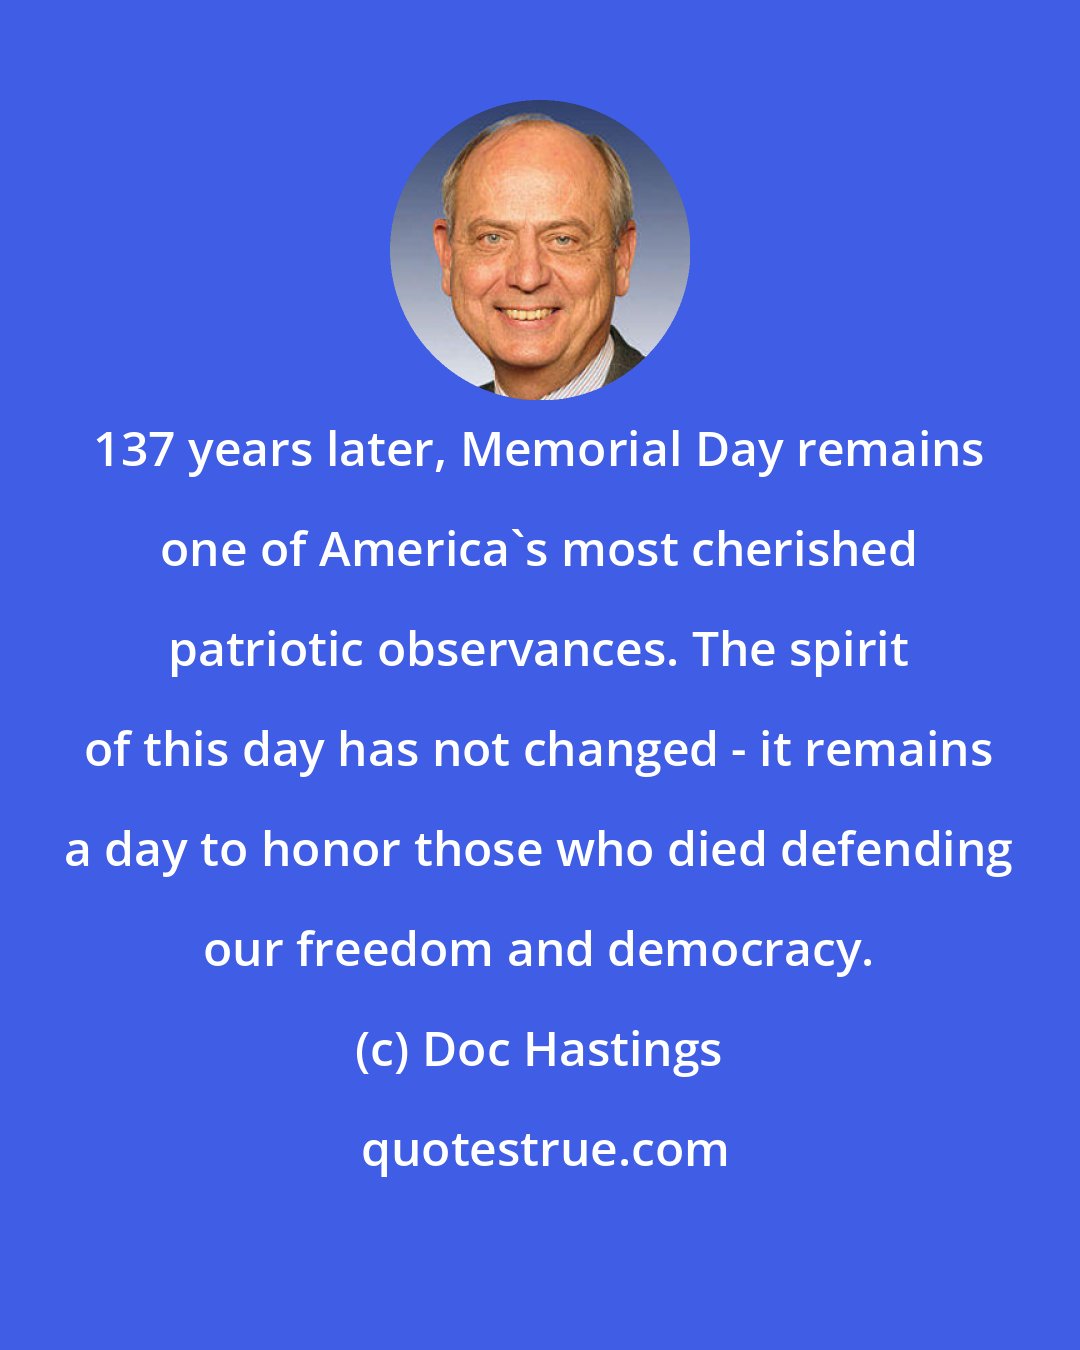 Doc Hastings: 137 years later, Memorial Day remains one of America's most cherished patriotic observances. The spirit of this day has not changed - it remains a day to honor those who died defending our freedom and democracy.